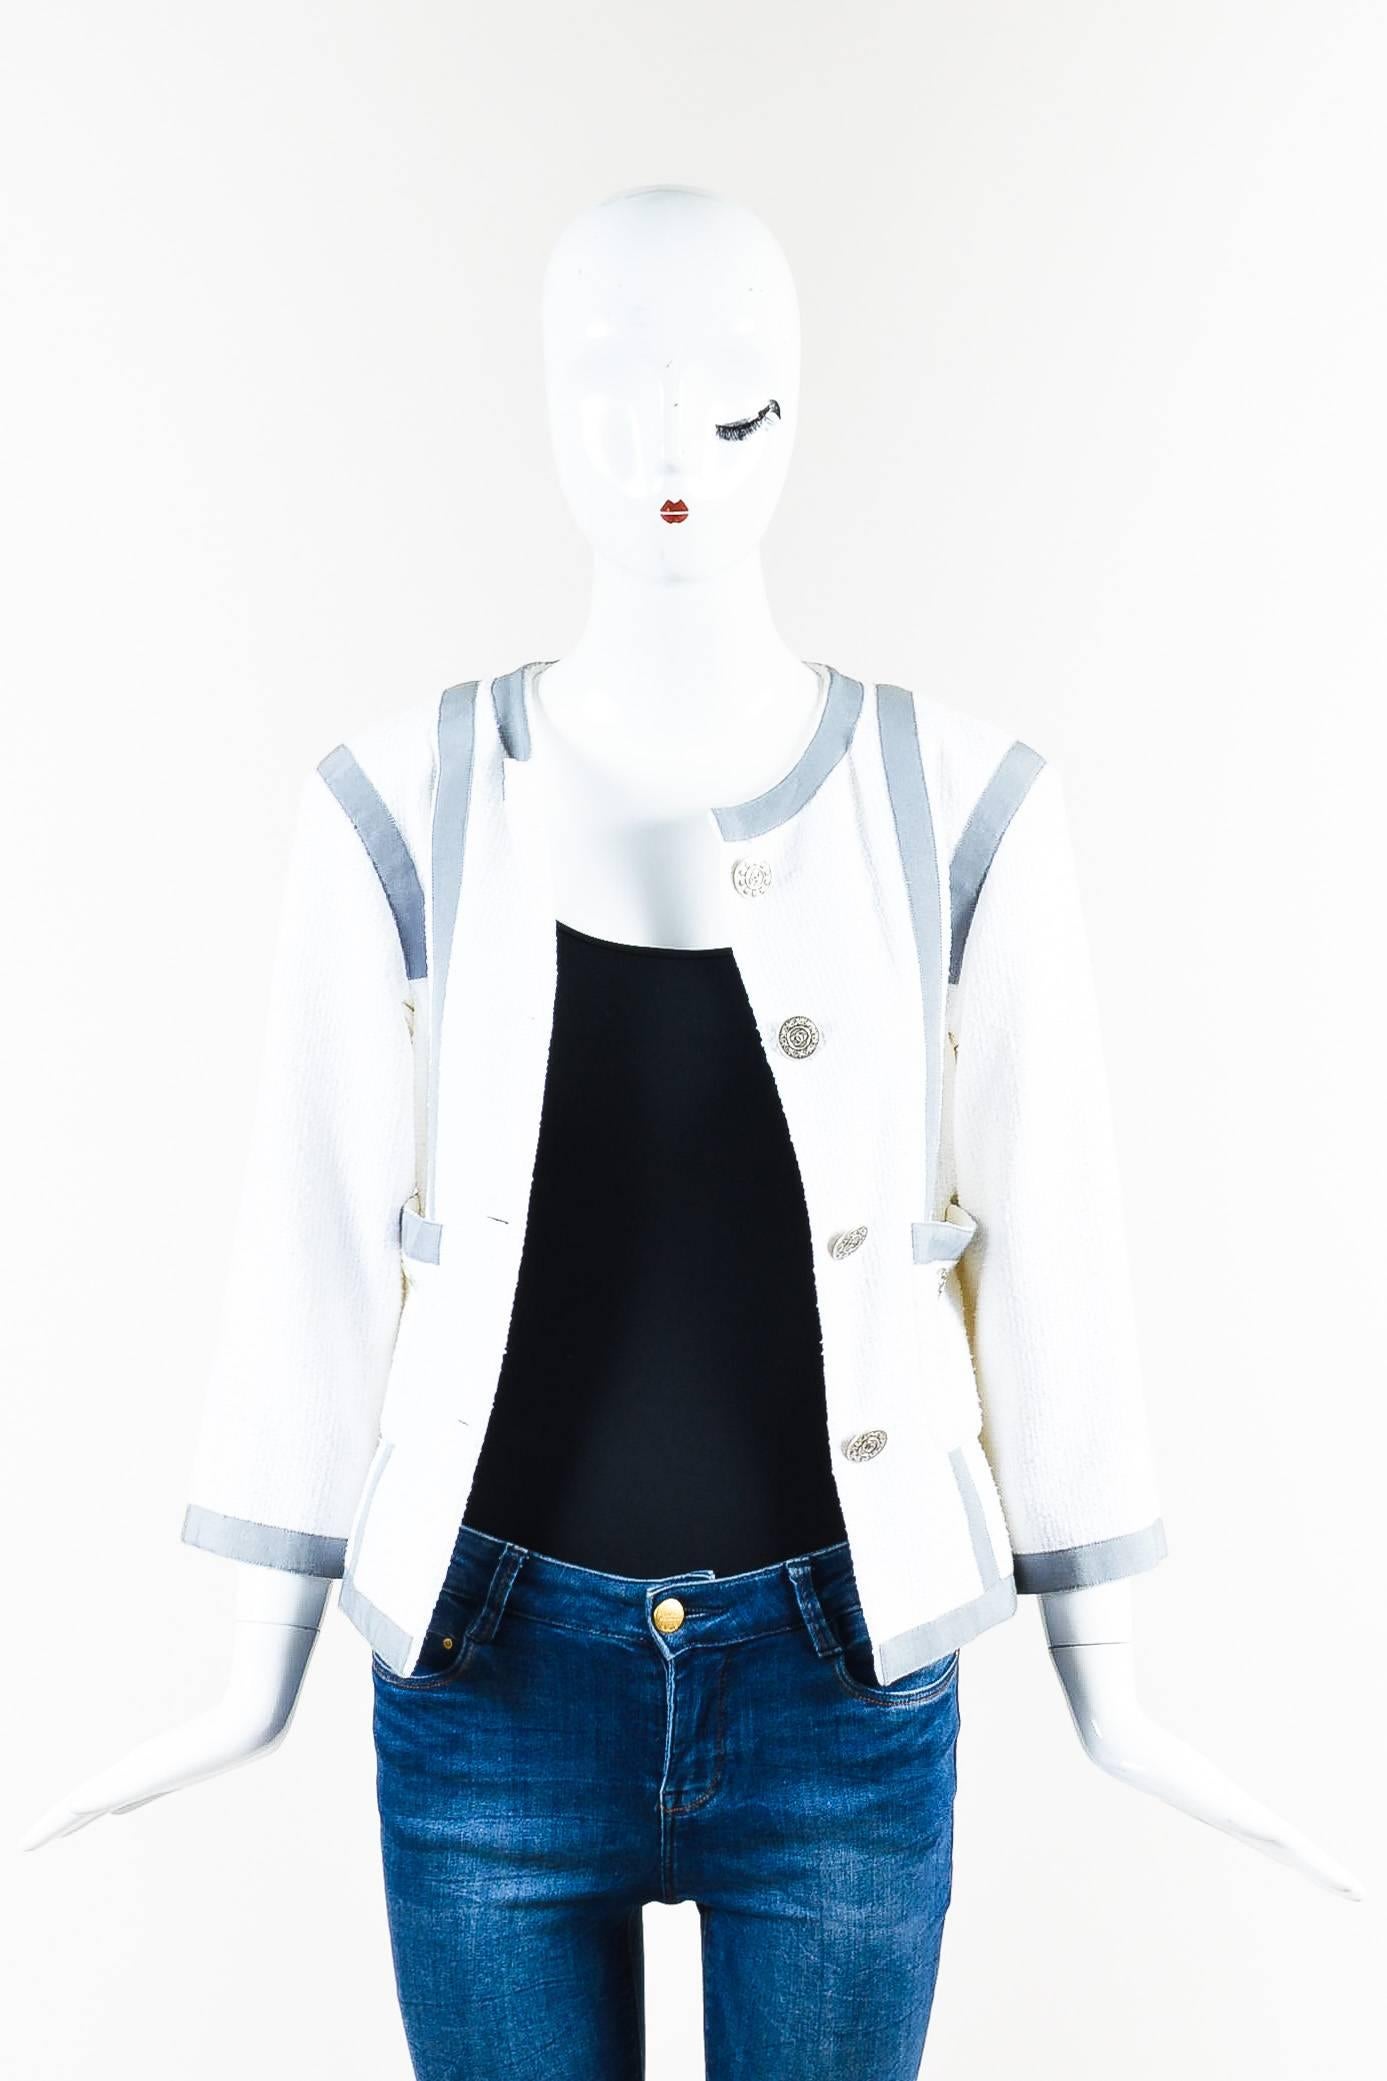 The signature style lady jacket from the house of Chanel gets an update with this piece featuring contrasting grosgrain trimming, structured shoulders, a collarless neckline, cropped sleeves, dual front patch pockets, and starred 'CC' buttons down